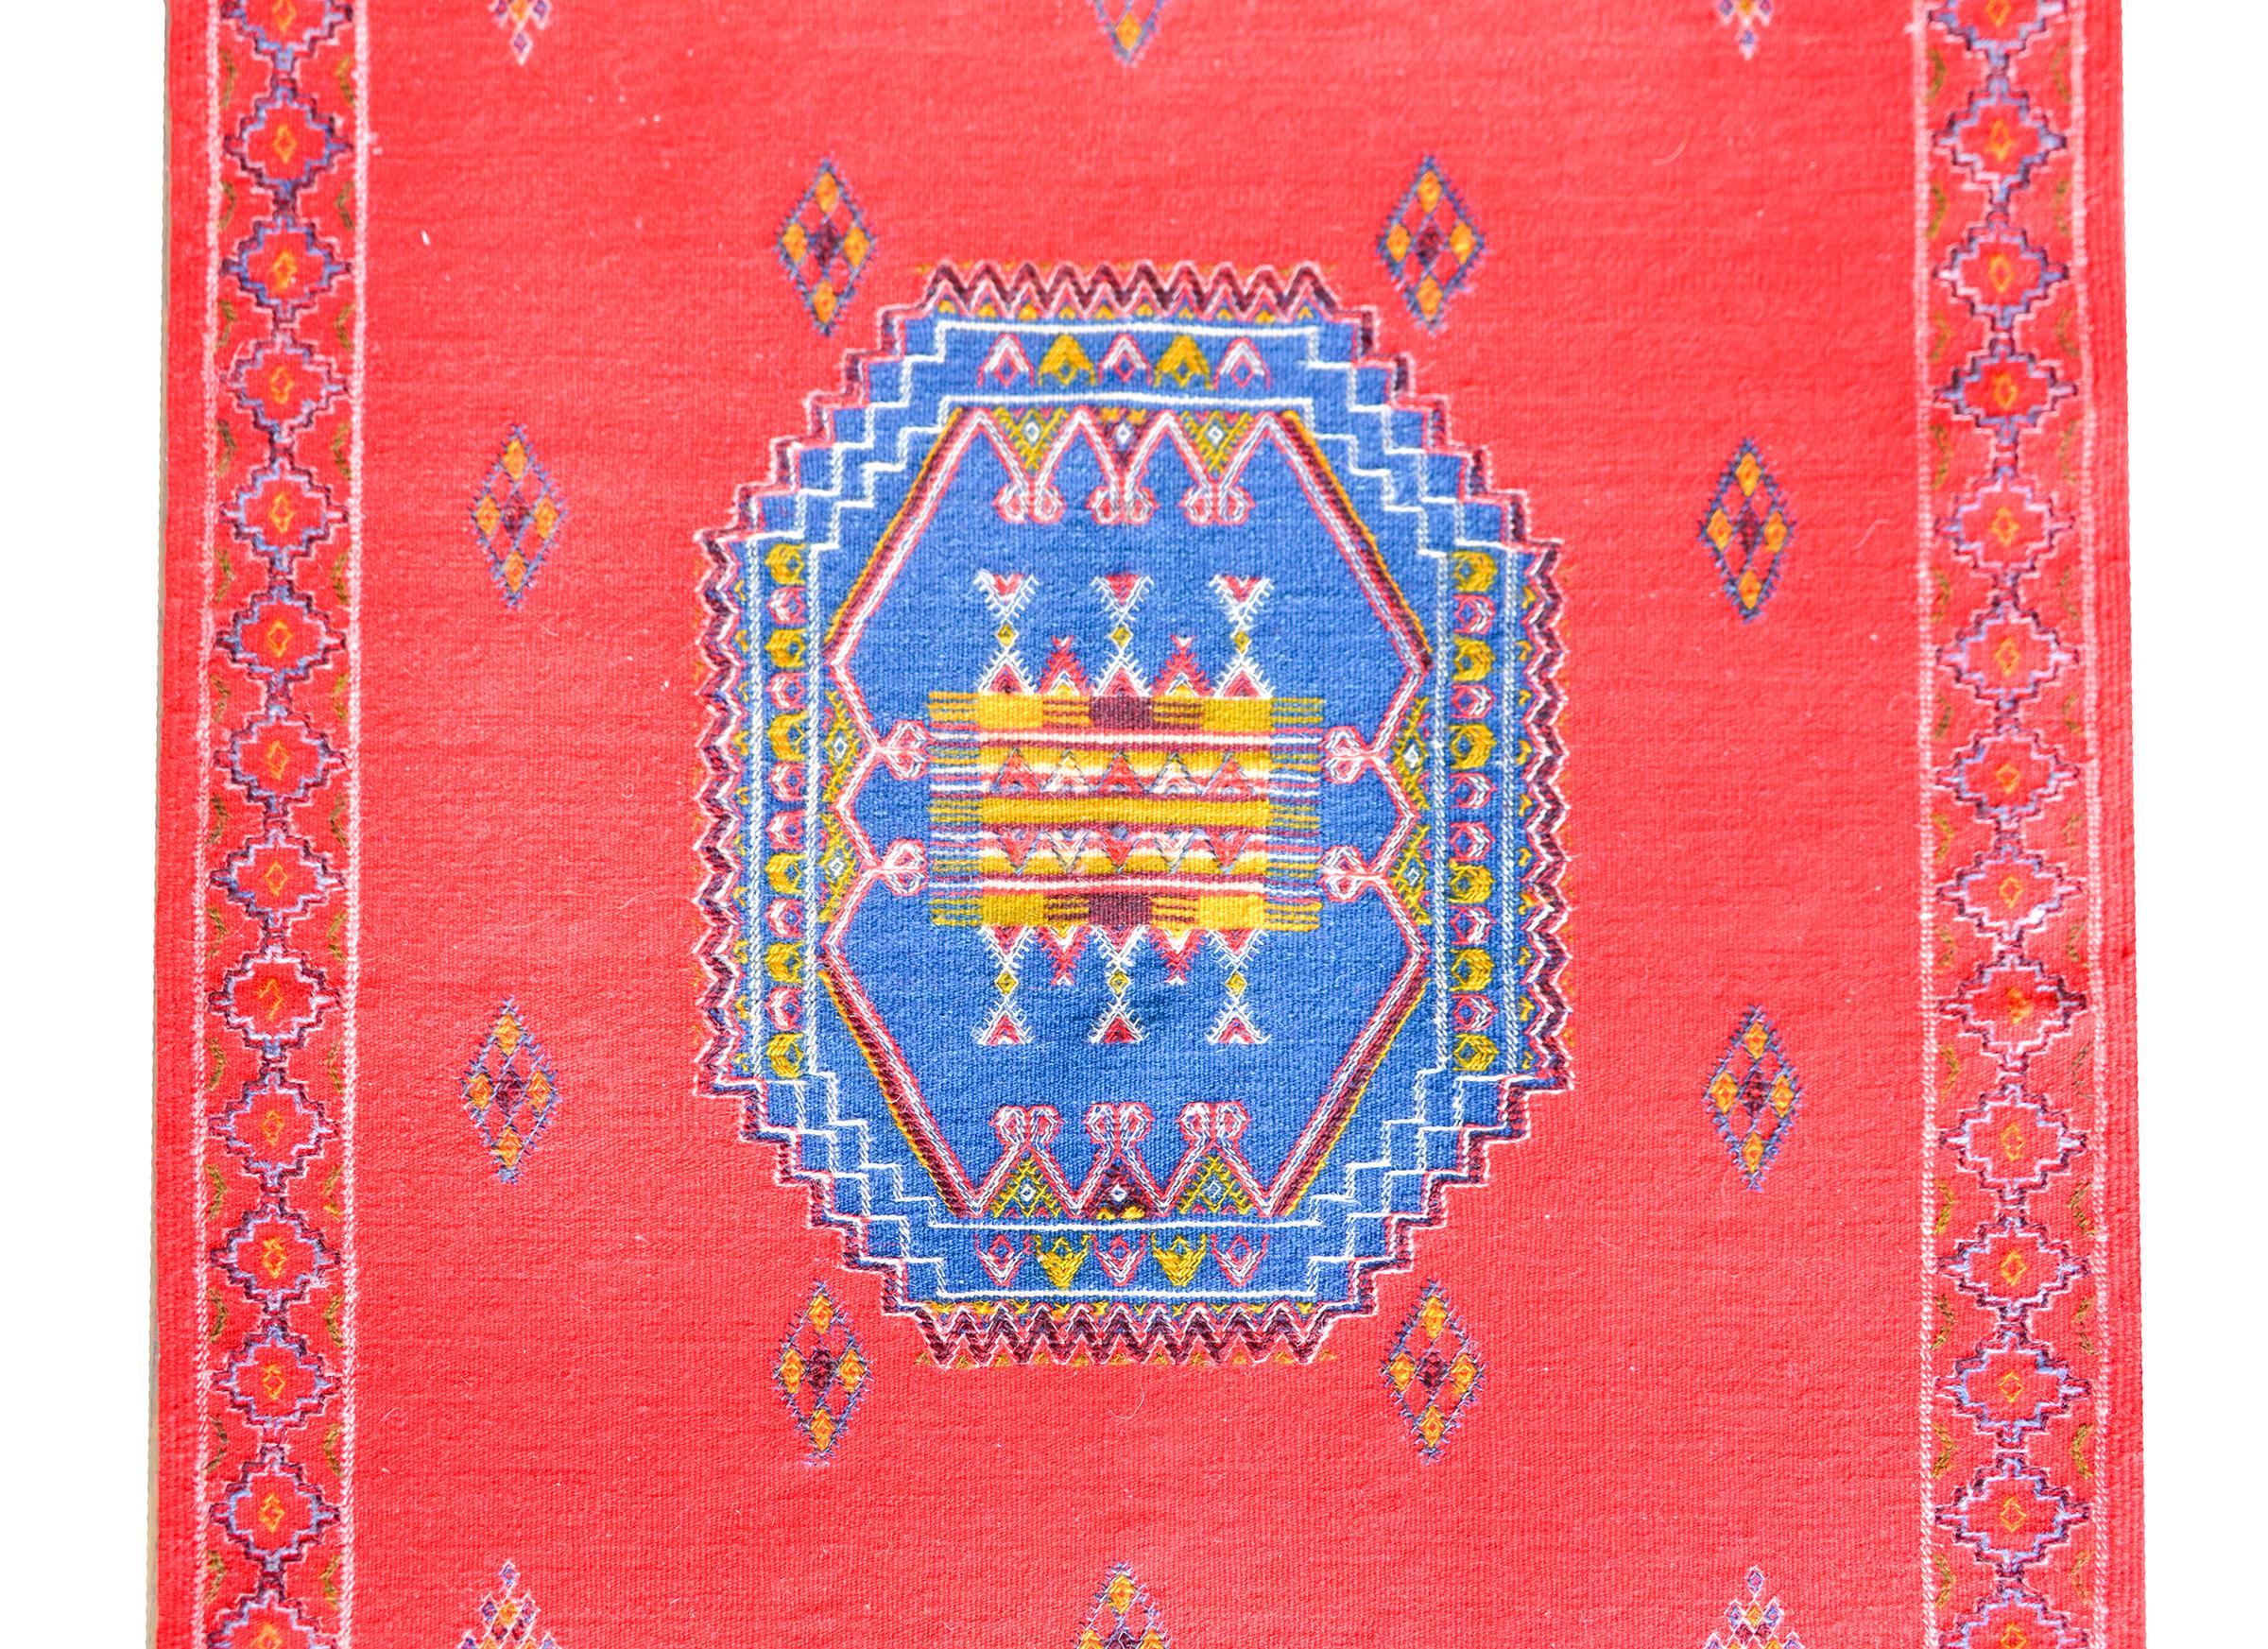 A bold Moroccan flatware rug with three large medallions with stylized floral patterns against a crimson field with more stylized flowers. The border is simple with an embroidered geometric pattern.